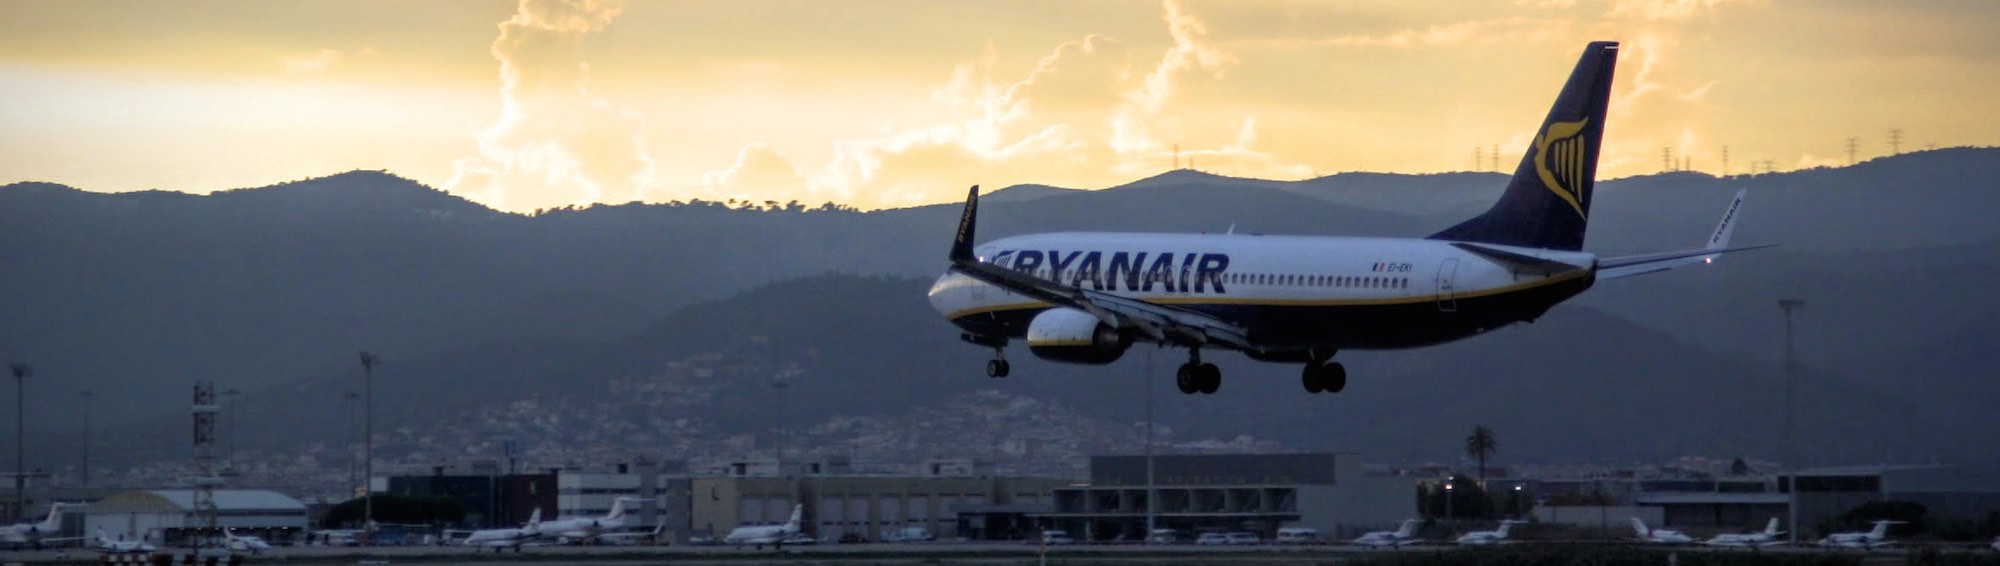 Best time to book flights for Sarajevo (SJJ) to London (STN) flights with Ryanair at AirHint